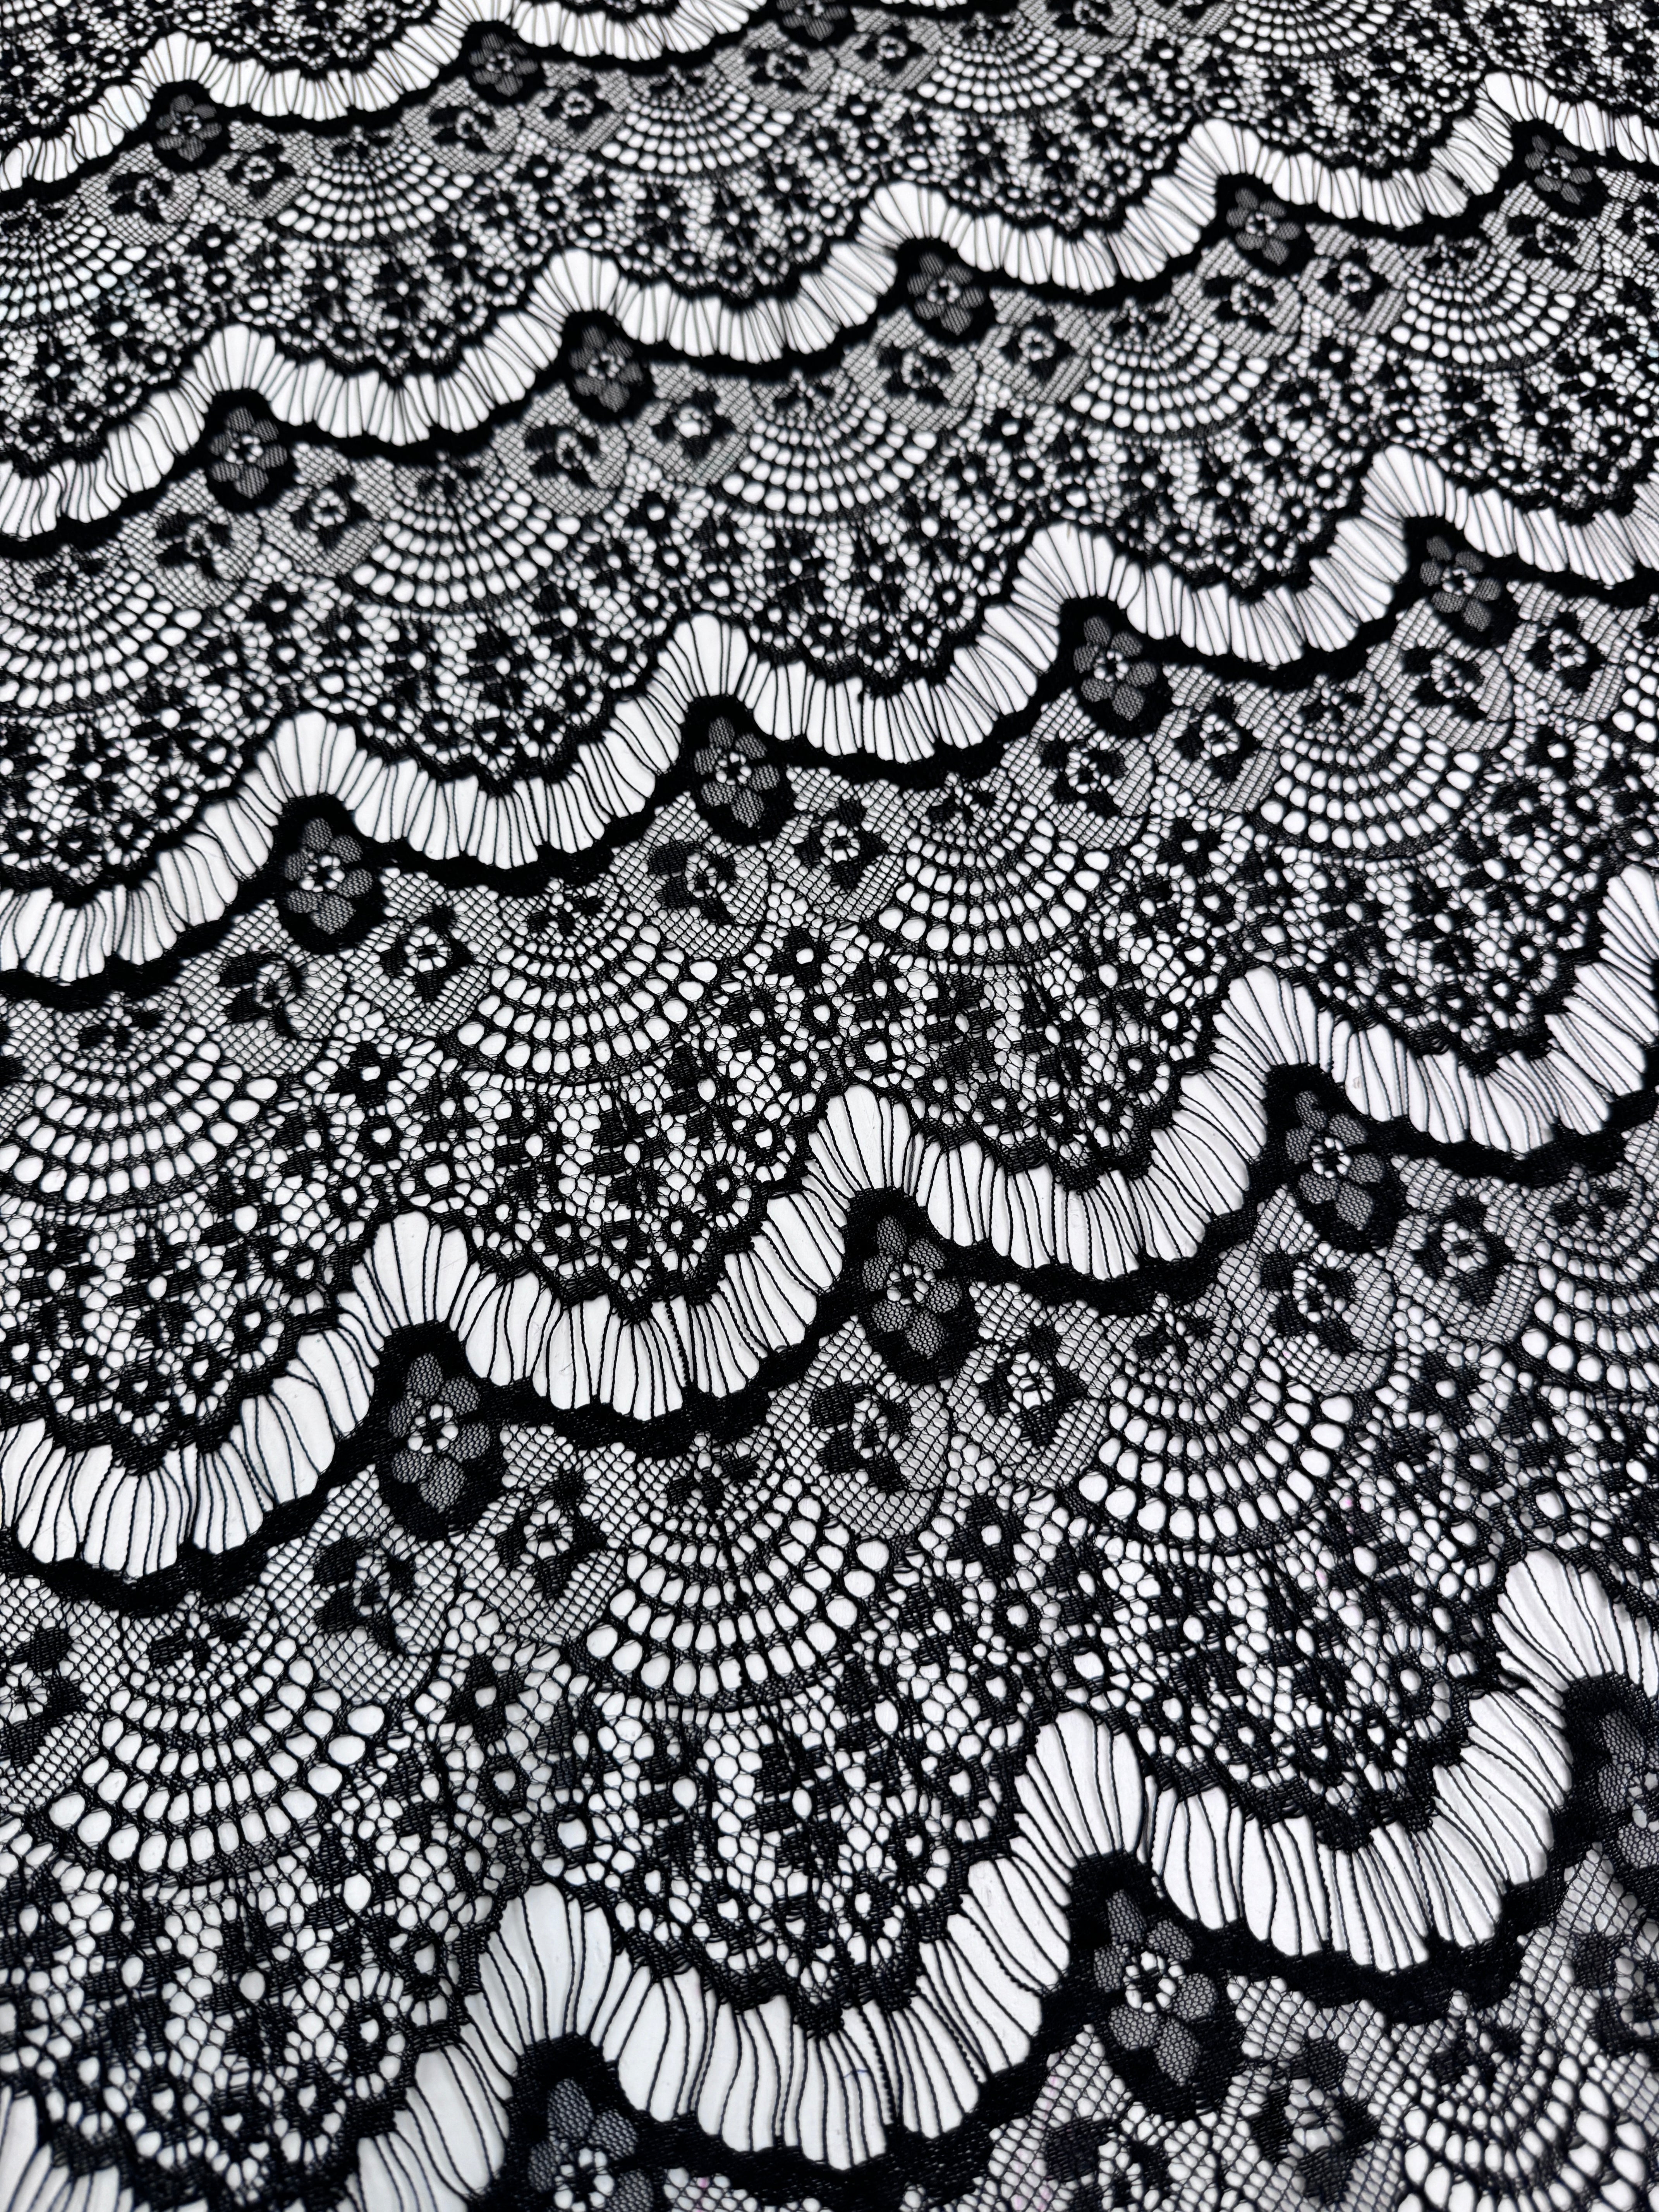 Black French Chantilly Floral Lingerie Lace, jet black Chantilly Floral Lingerie Lace, dark gray Chantilly Floral Lingerie Lace, Chantilly Floral Lingerie Lace for woman, Chantilly Floral Lingerie Lace for bride, Chantilly Floral Lingerie Lace for party wear, Chantilly Floral Lingerie Lace in low price, Chantilly Floral Lingerie Lace on discount